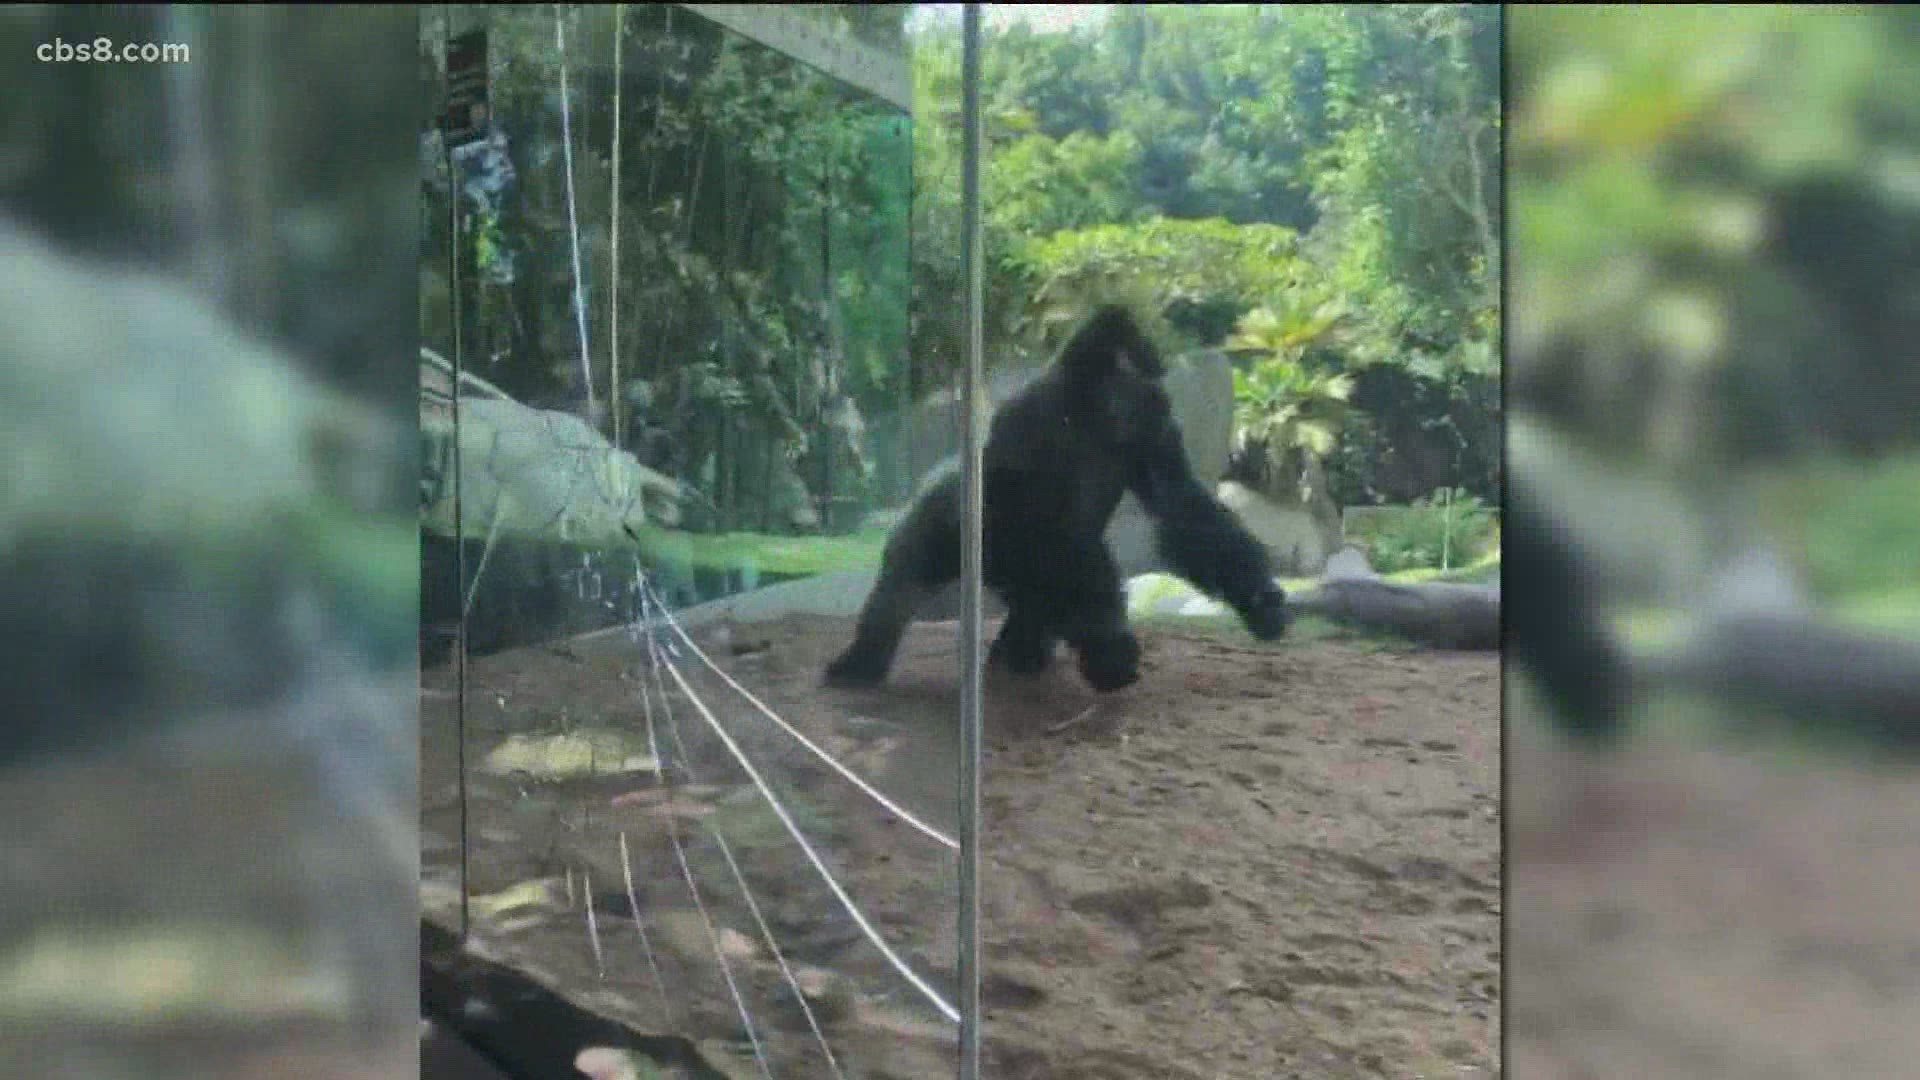 One gorilla slammed another into the viewing window cracking one layer of glass.